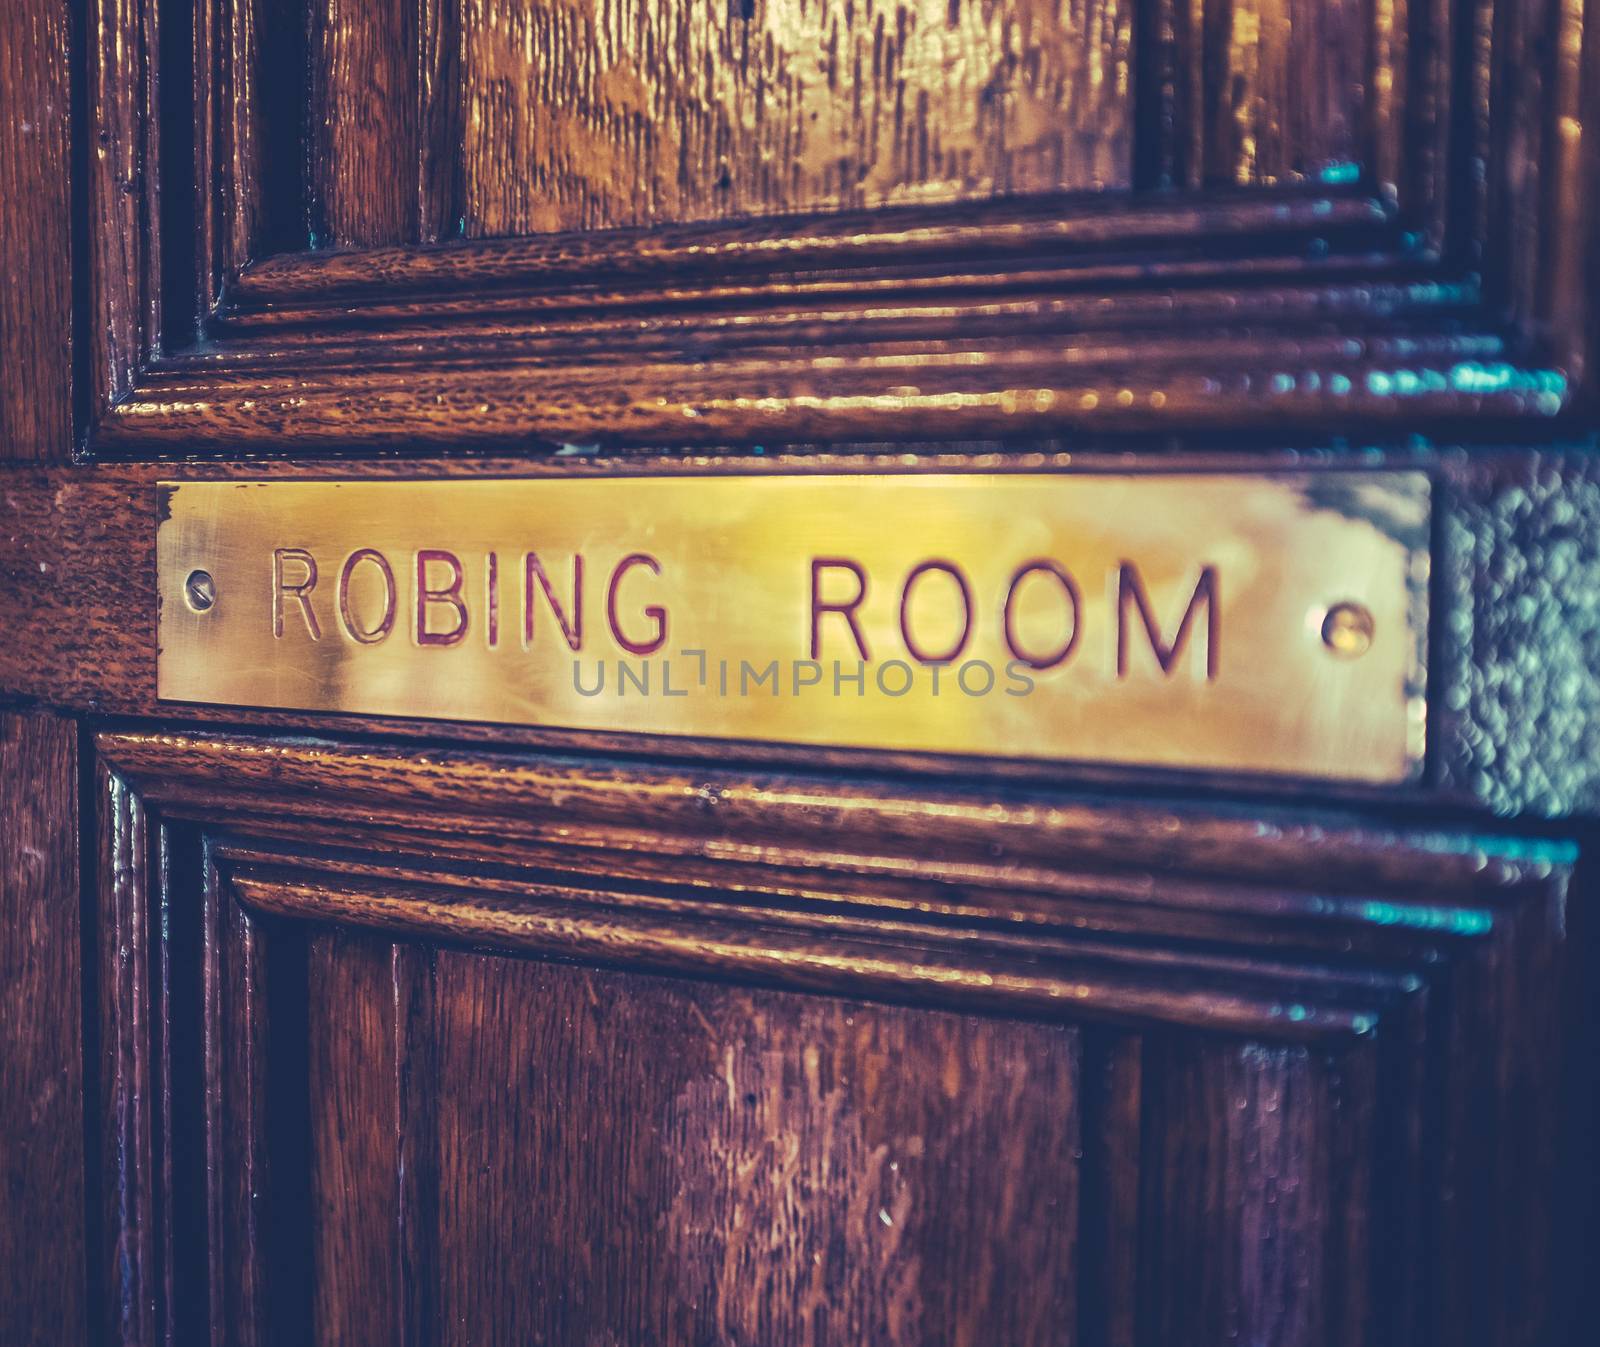 Retro Sign For The Robing Room At A University, Parliament Or Court In The United Kingdom